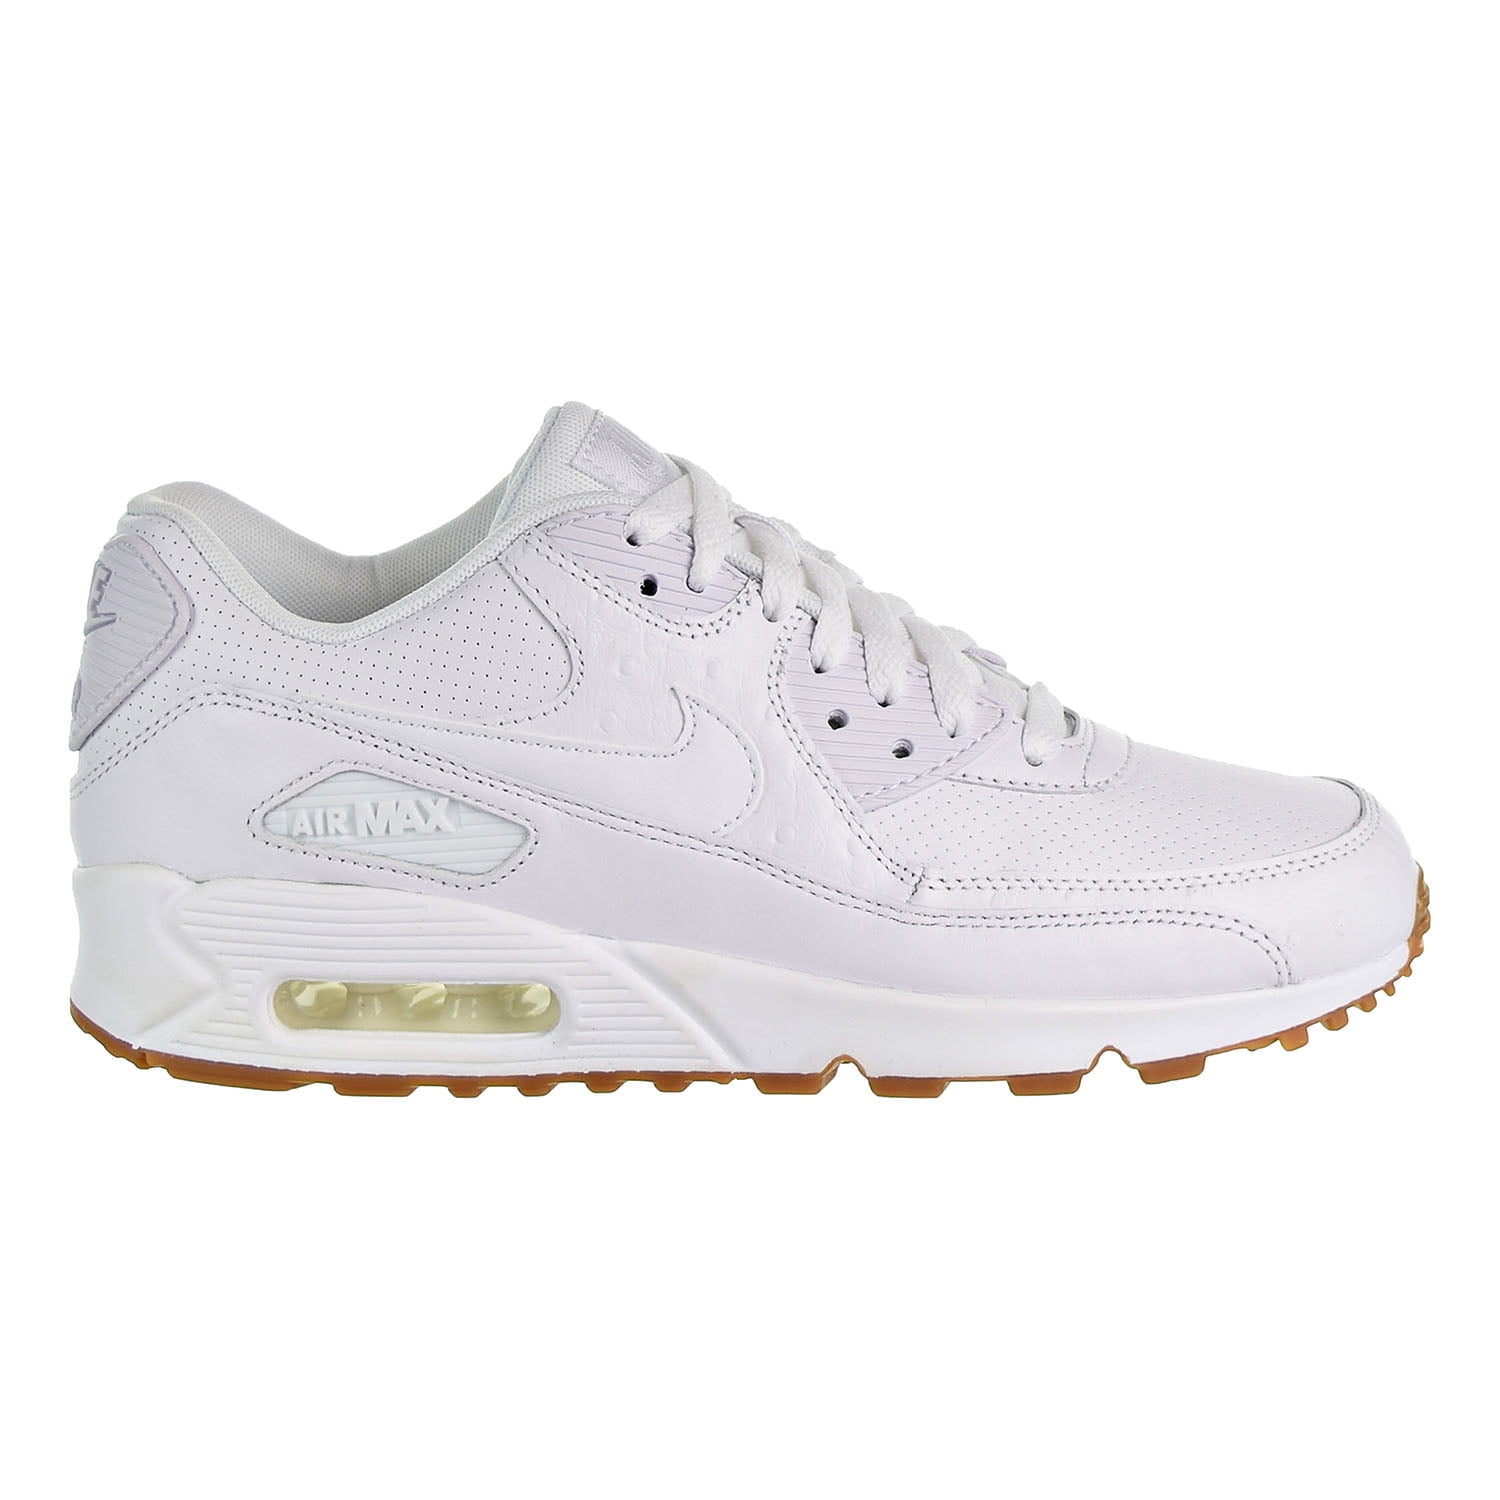 Nike Air Max 90 Leather PA Men's Shoes White/White/Gum Light Brown ...